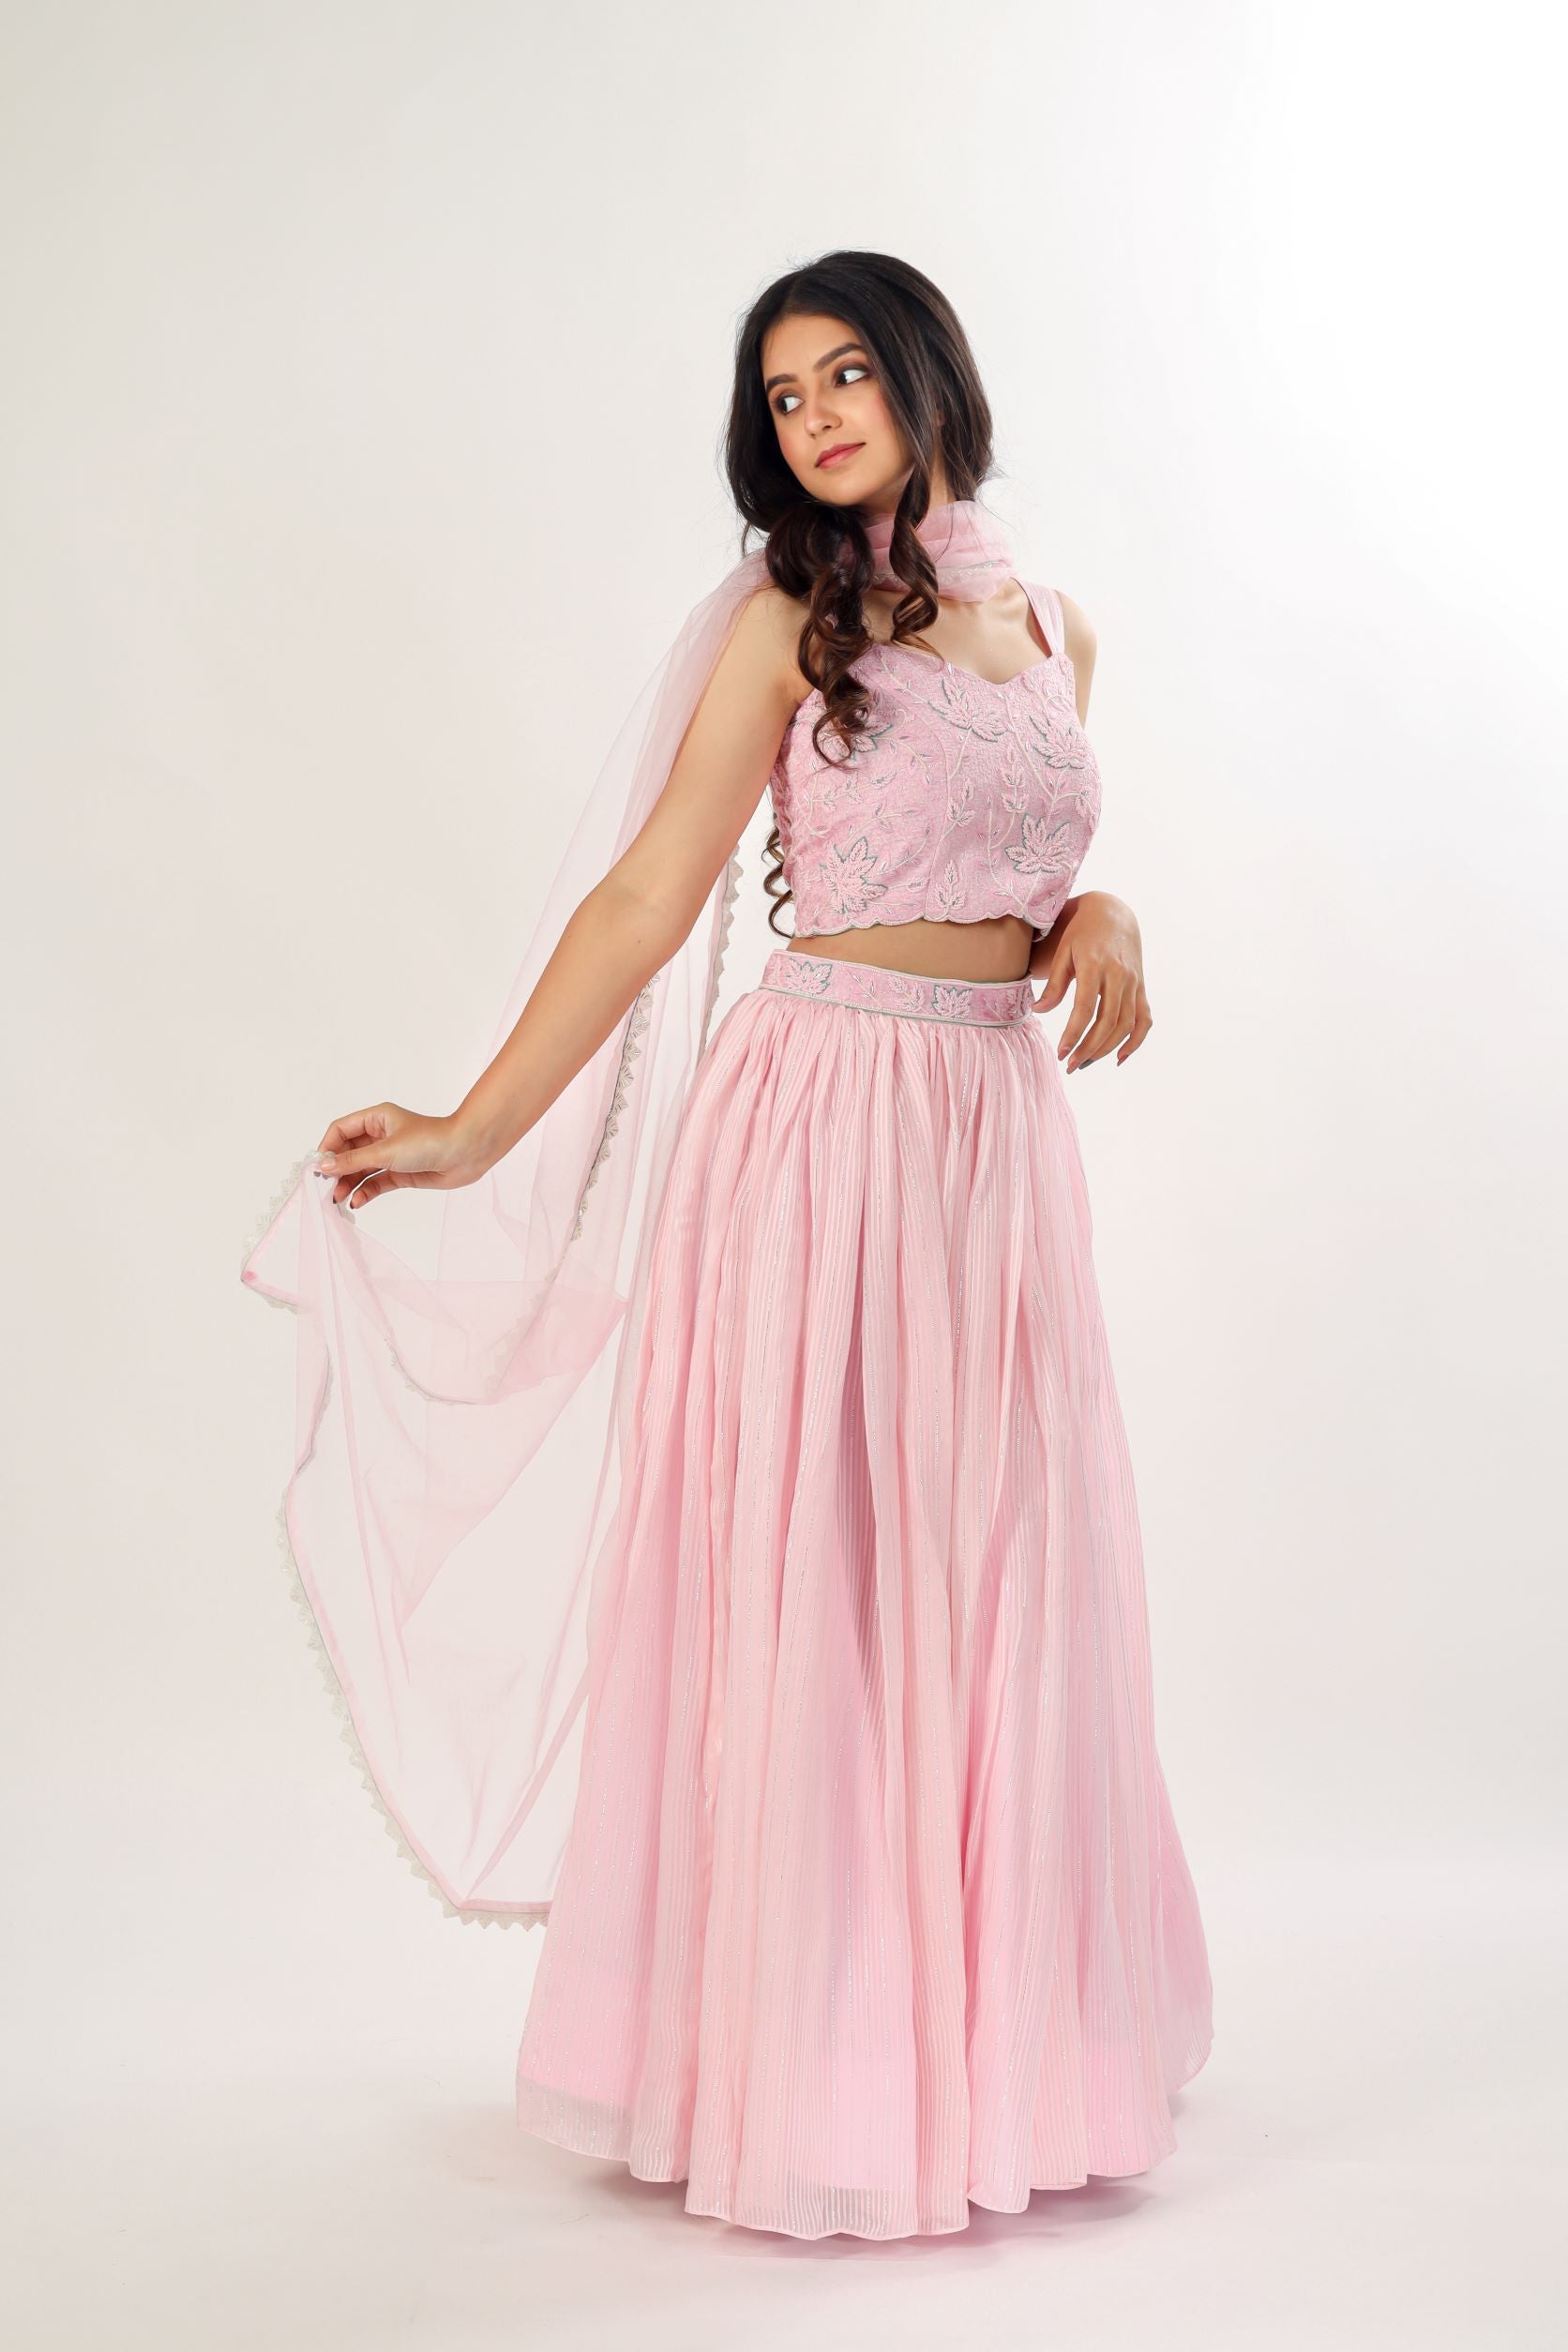 Mabia Boutique - Presenting the Silk Lehenga Collection- PARNIKA . An  elegant light teal and peach net lehenga with a beautiful pleated skirt  adorned with intricate Aari detailing has been carried so